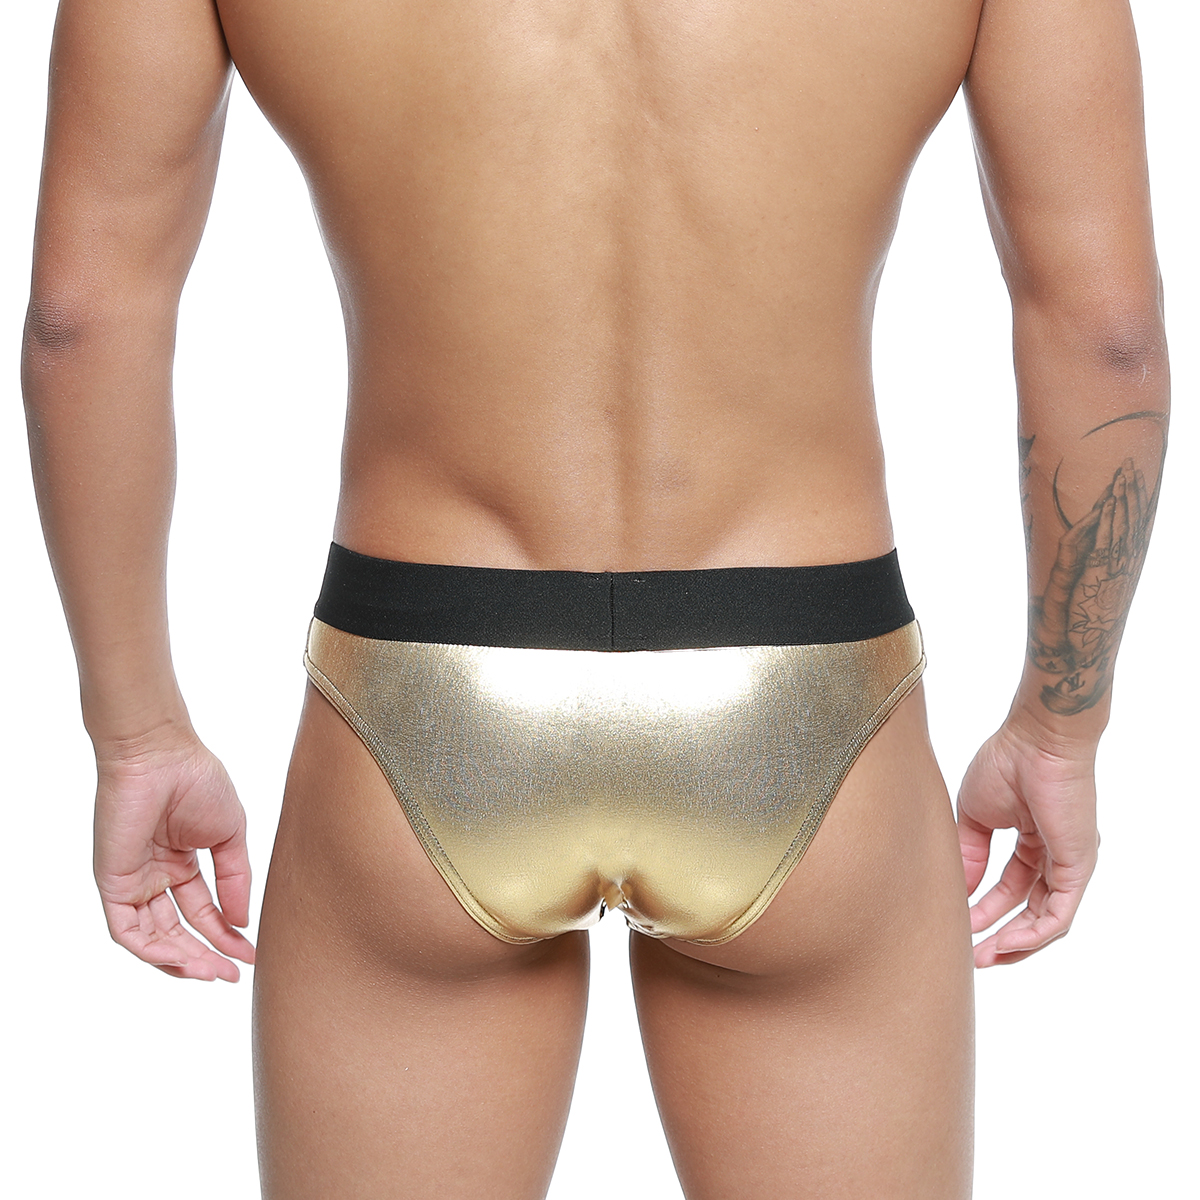 [MetroMuscleWear] Charles Competition Suit Gold (4974-38)